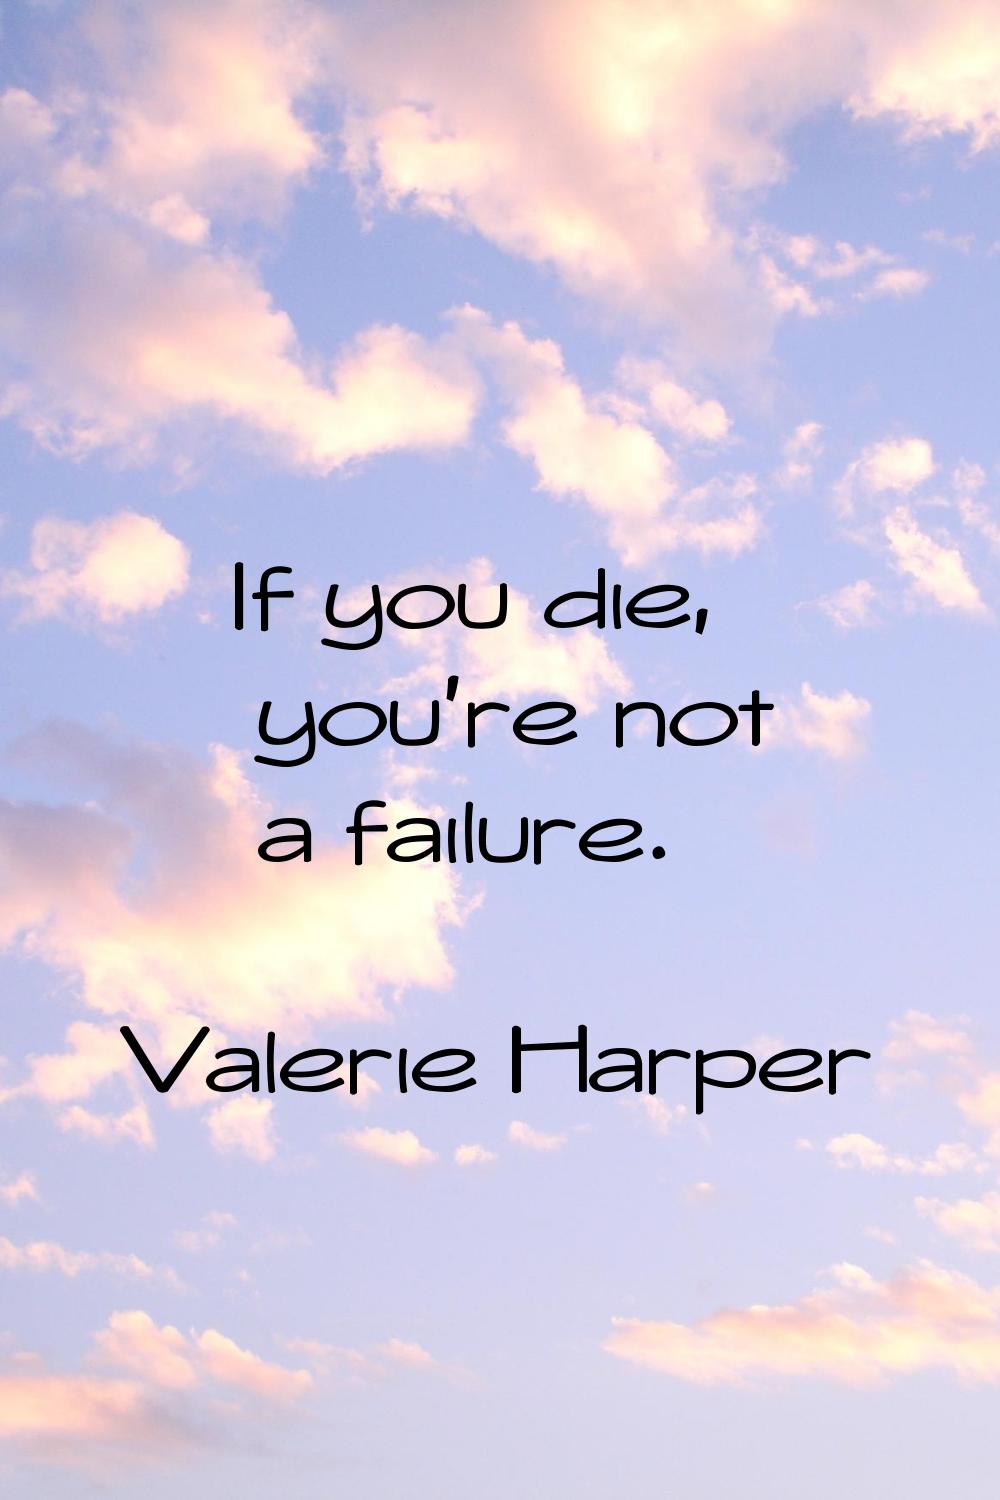 If you die, you're not a failure.